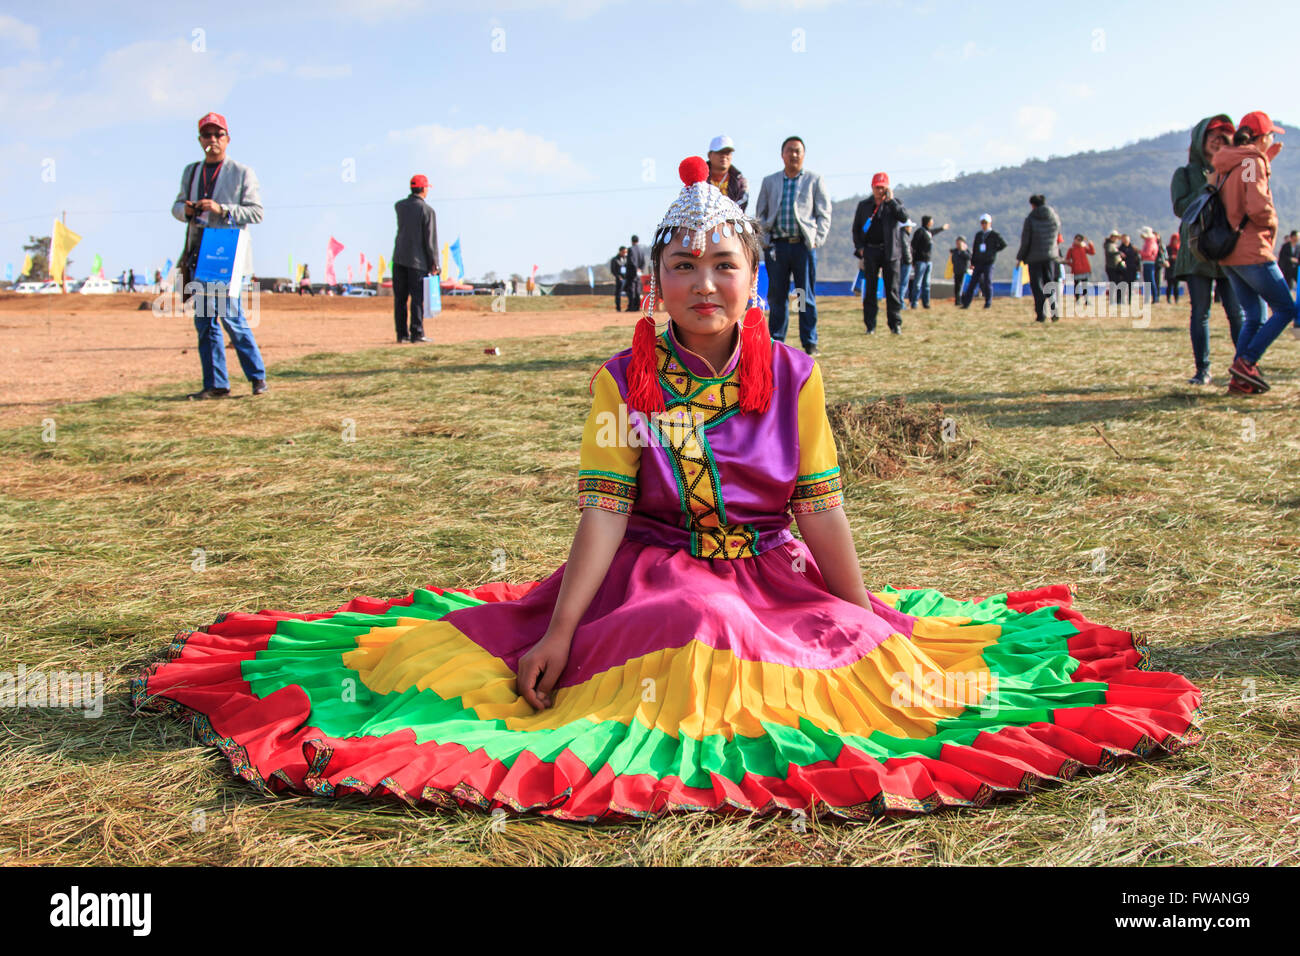 Heqing, China - March 15, 2016: Chinese girl in traditional Chinese clothing during the Heqing Qifeng Pear Flower festival Stock Photo